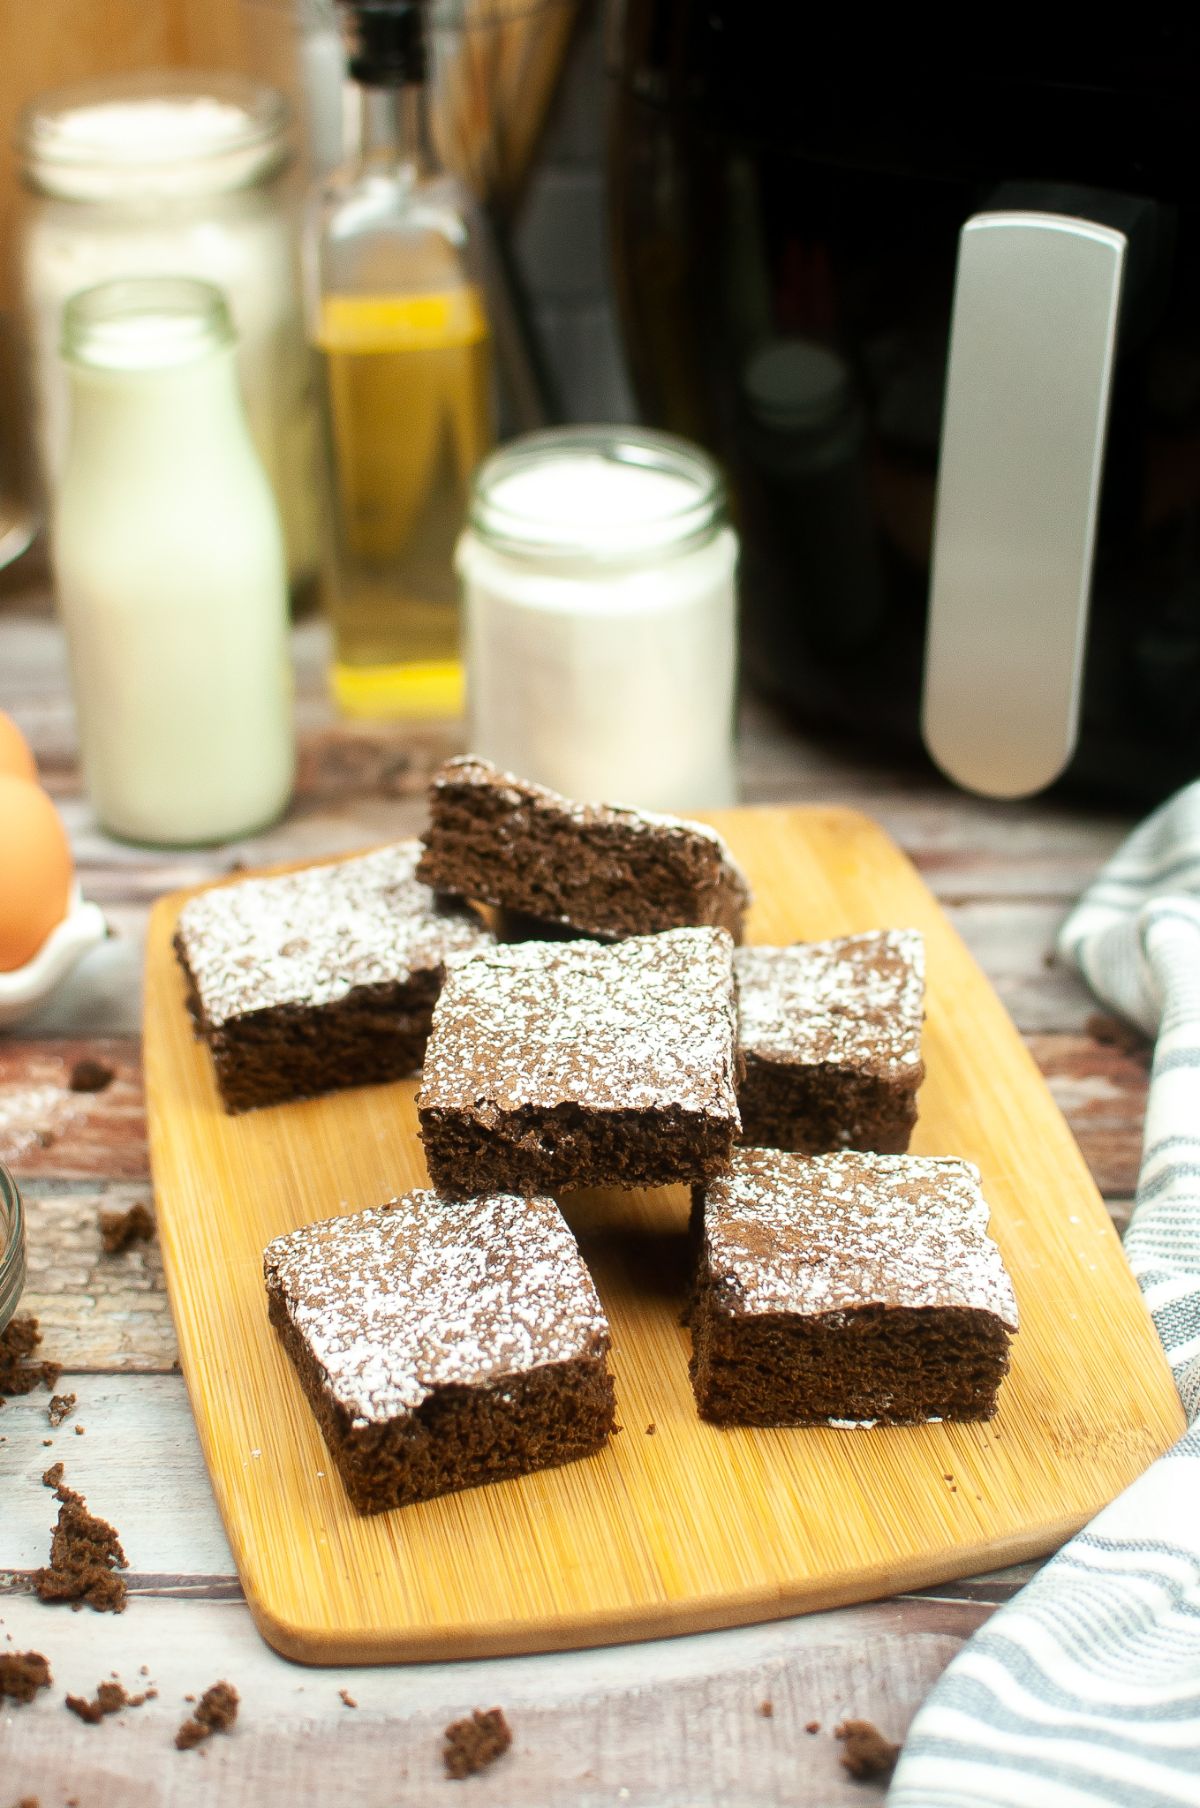 Air Fryer Brownies on a wooden chopping board. Air Fryer and other ingredients on the side.